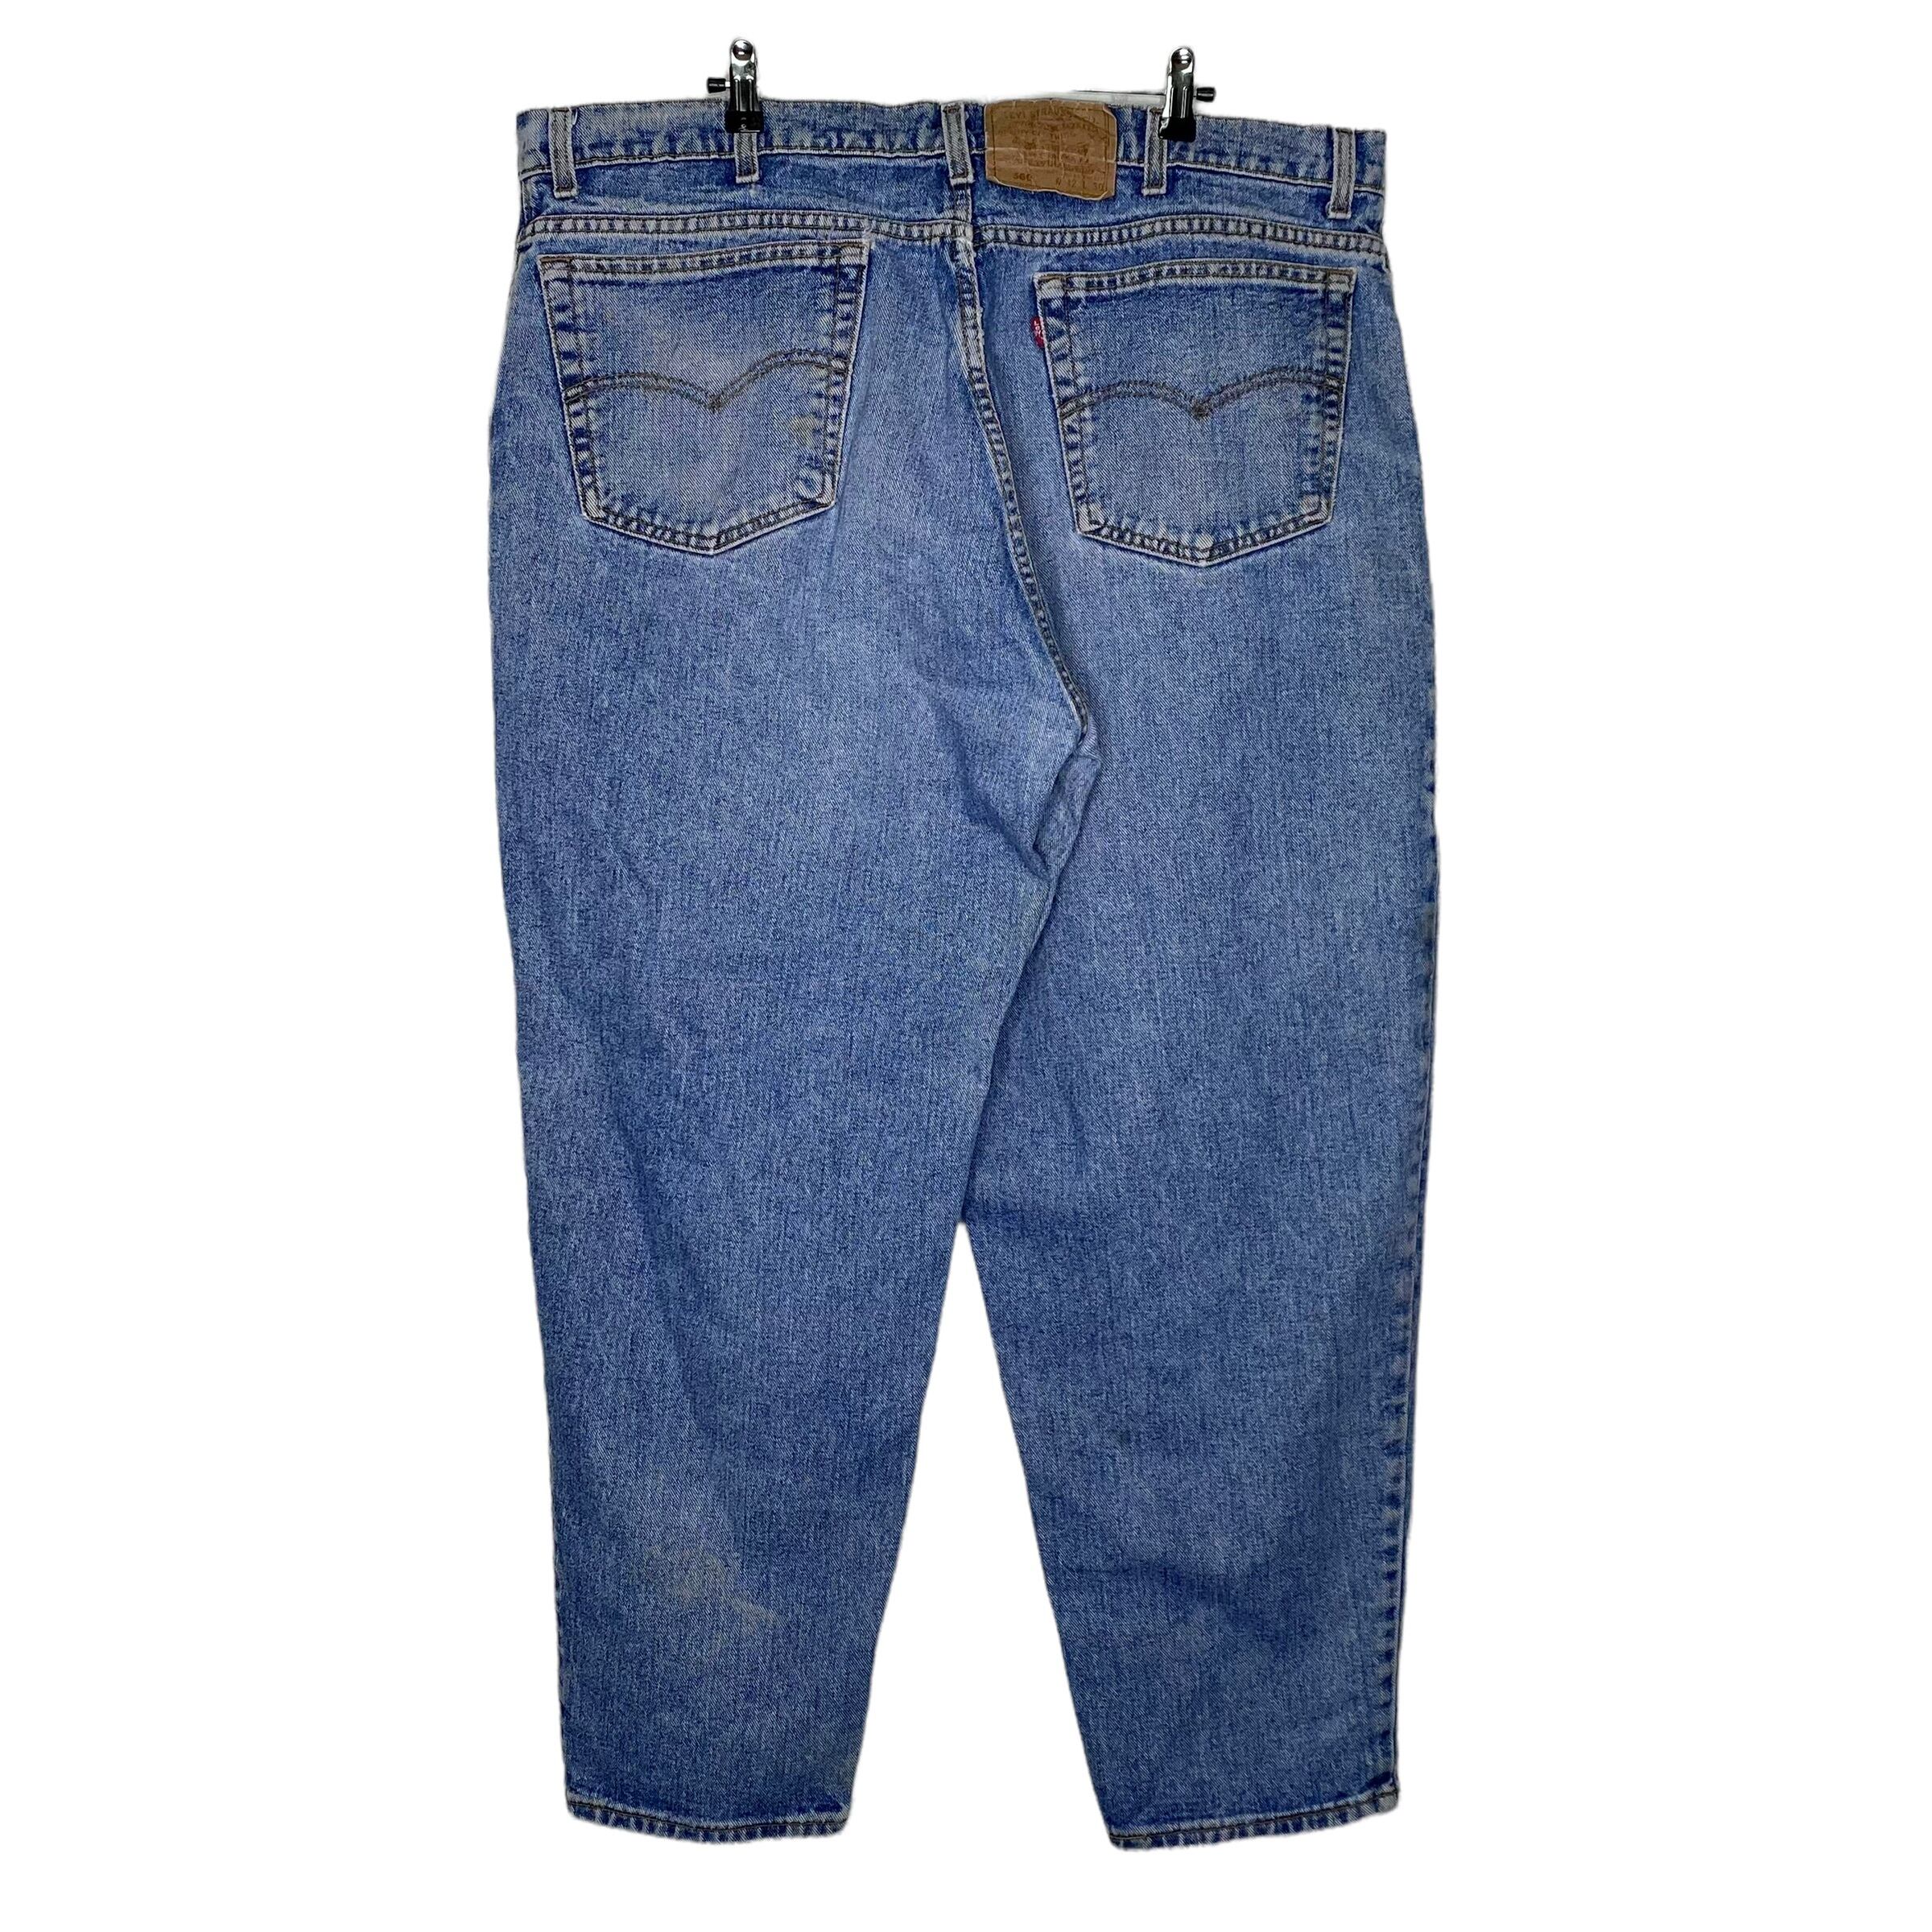 【Made in USA 】【W42×L30】Levi's560 デニムパンツ　革パッチ　コットン100% | 古着屋OLDGREEN powered  by BASE